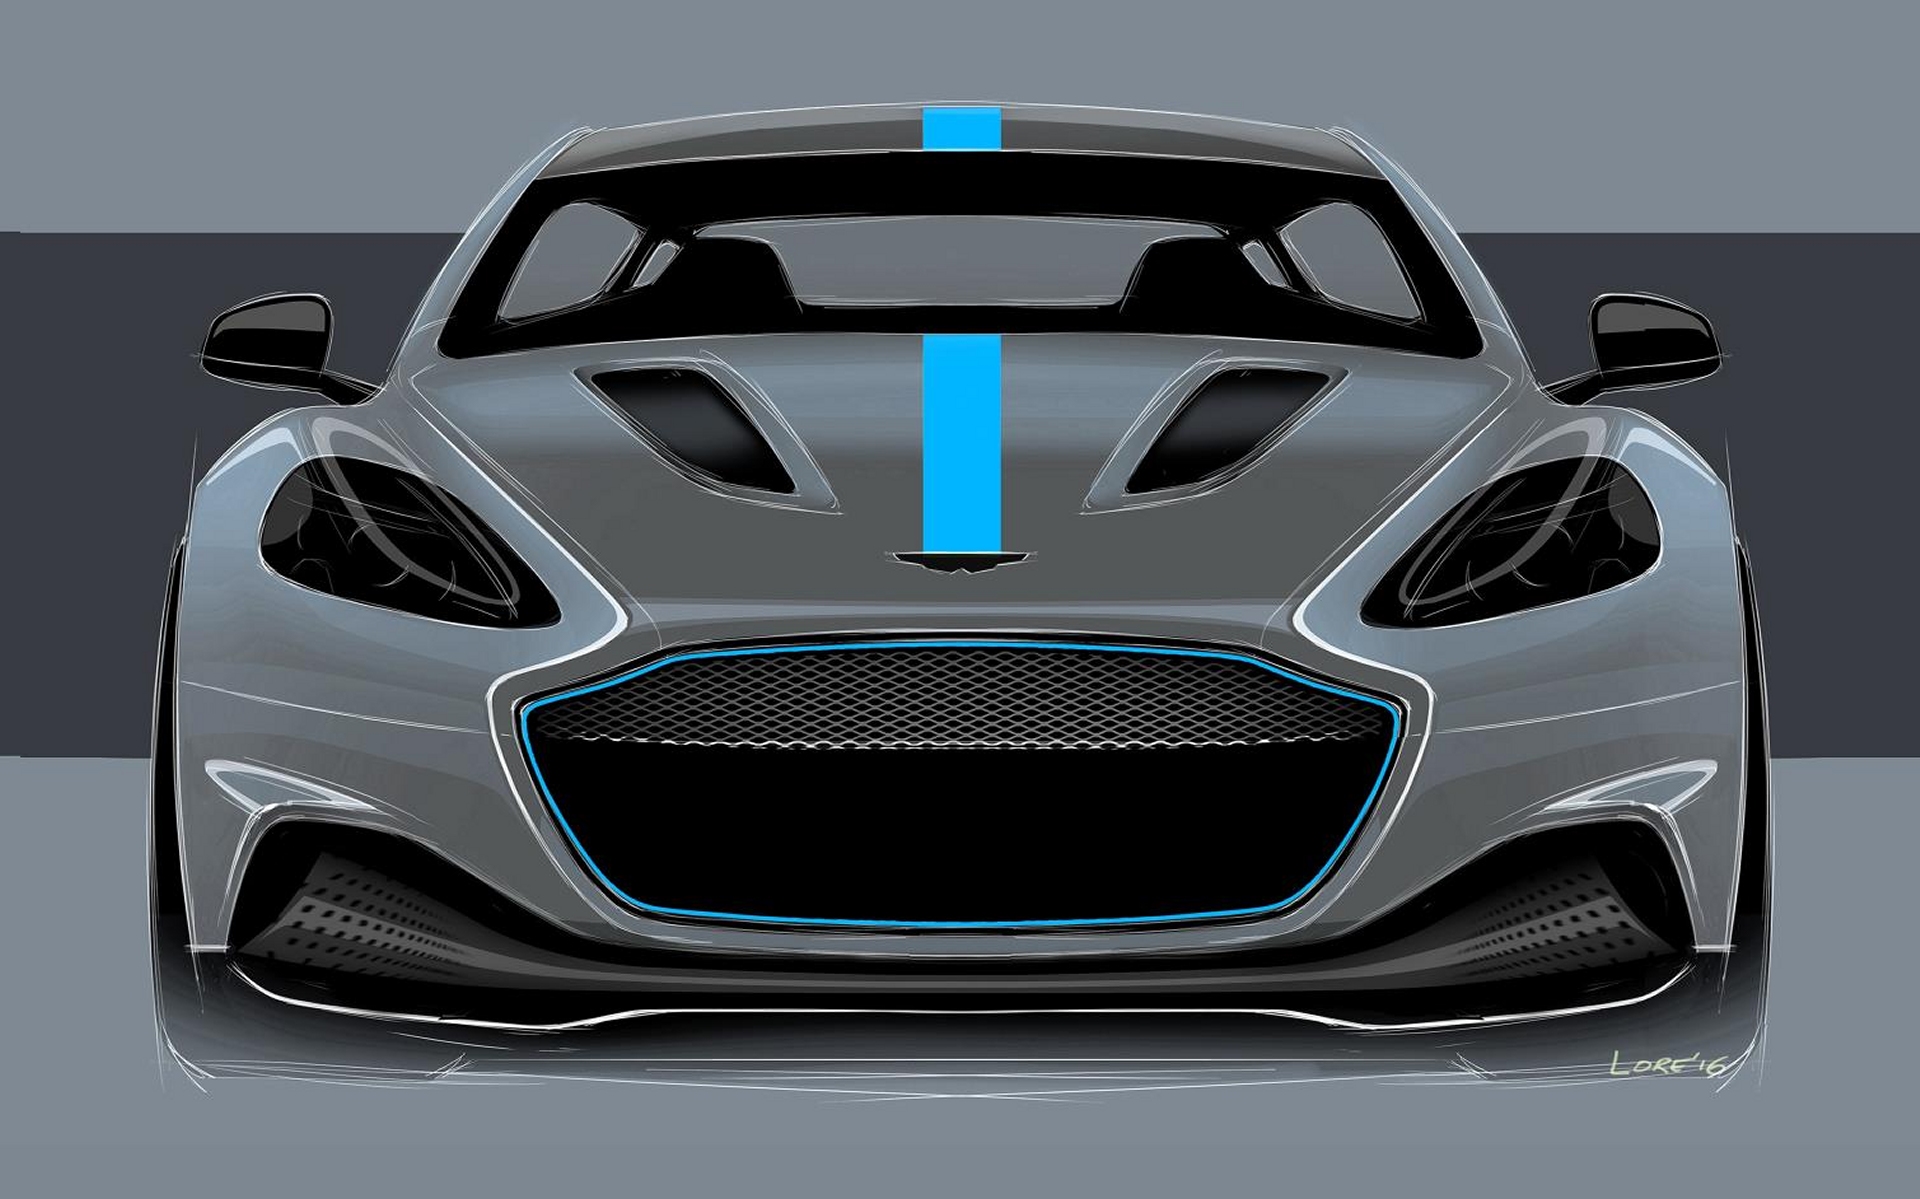 Aston Martin RapidE - Front View - First All-electric Aston Martin